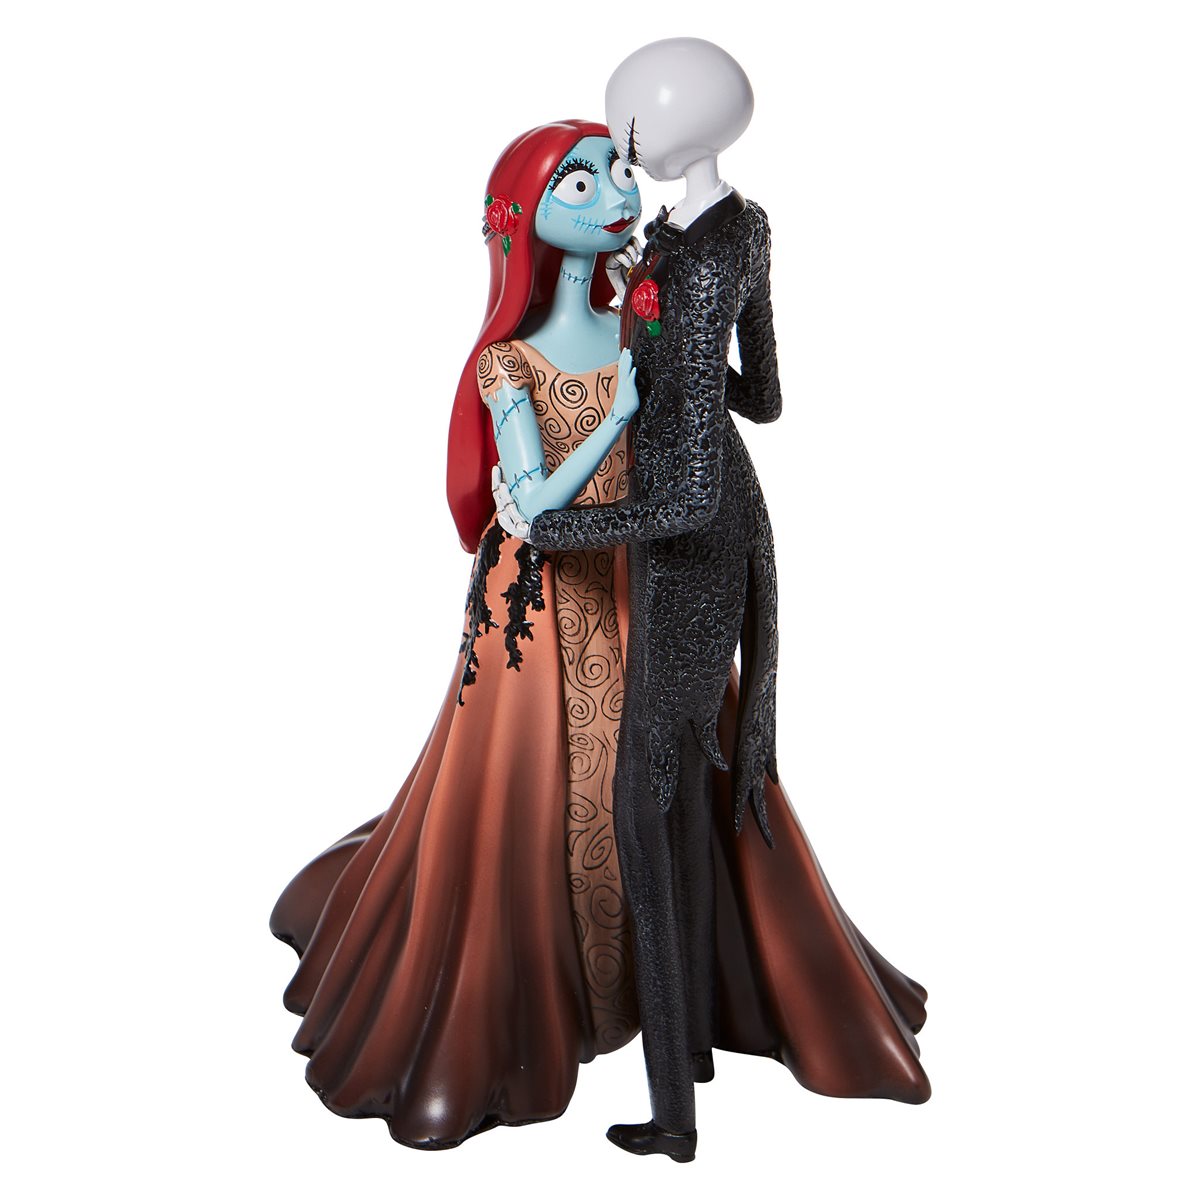 Nightmare Before Christmas Jack and Sally Couture de Force Statue